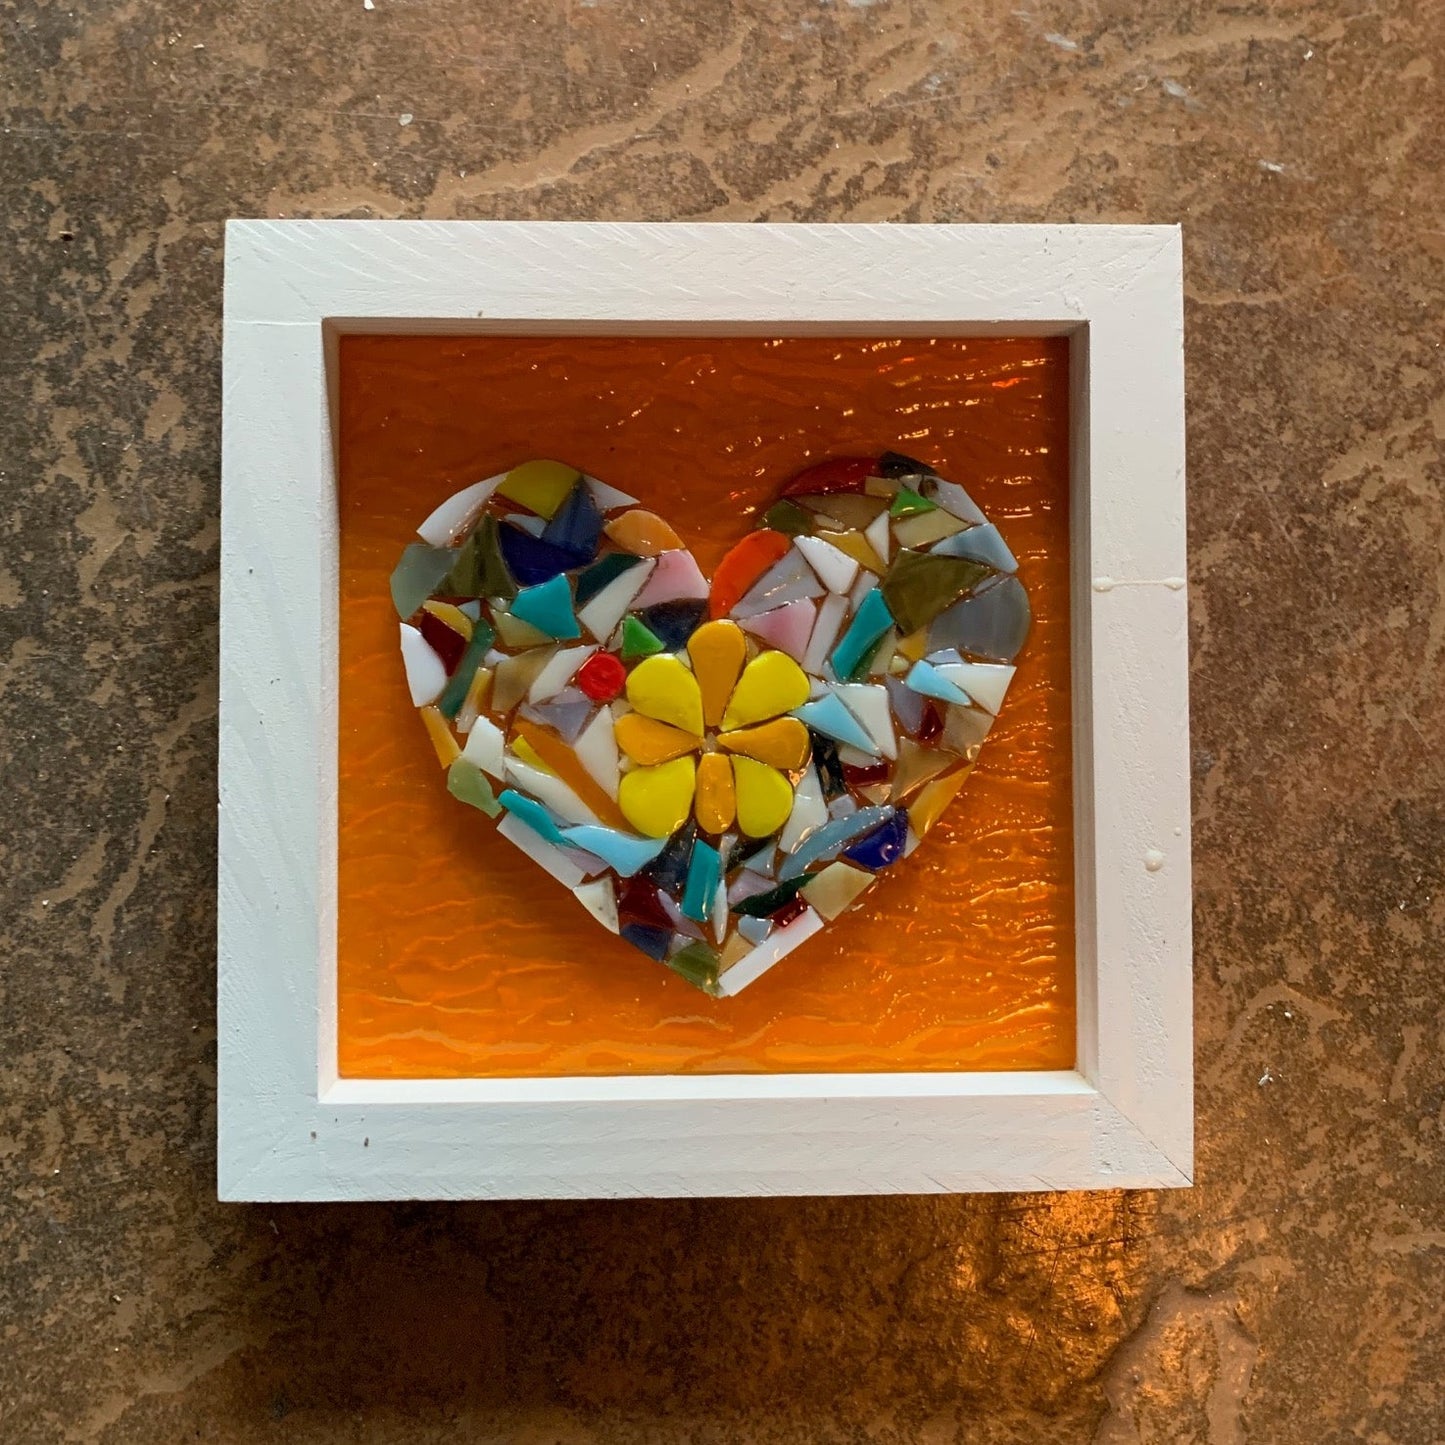 Intro to Mosaics Class with Celeste - April 20th 1:00-3:00pm